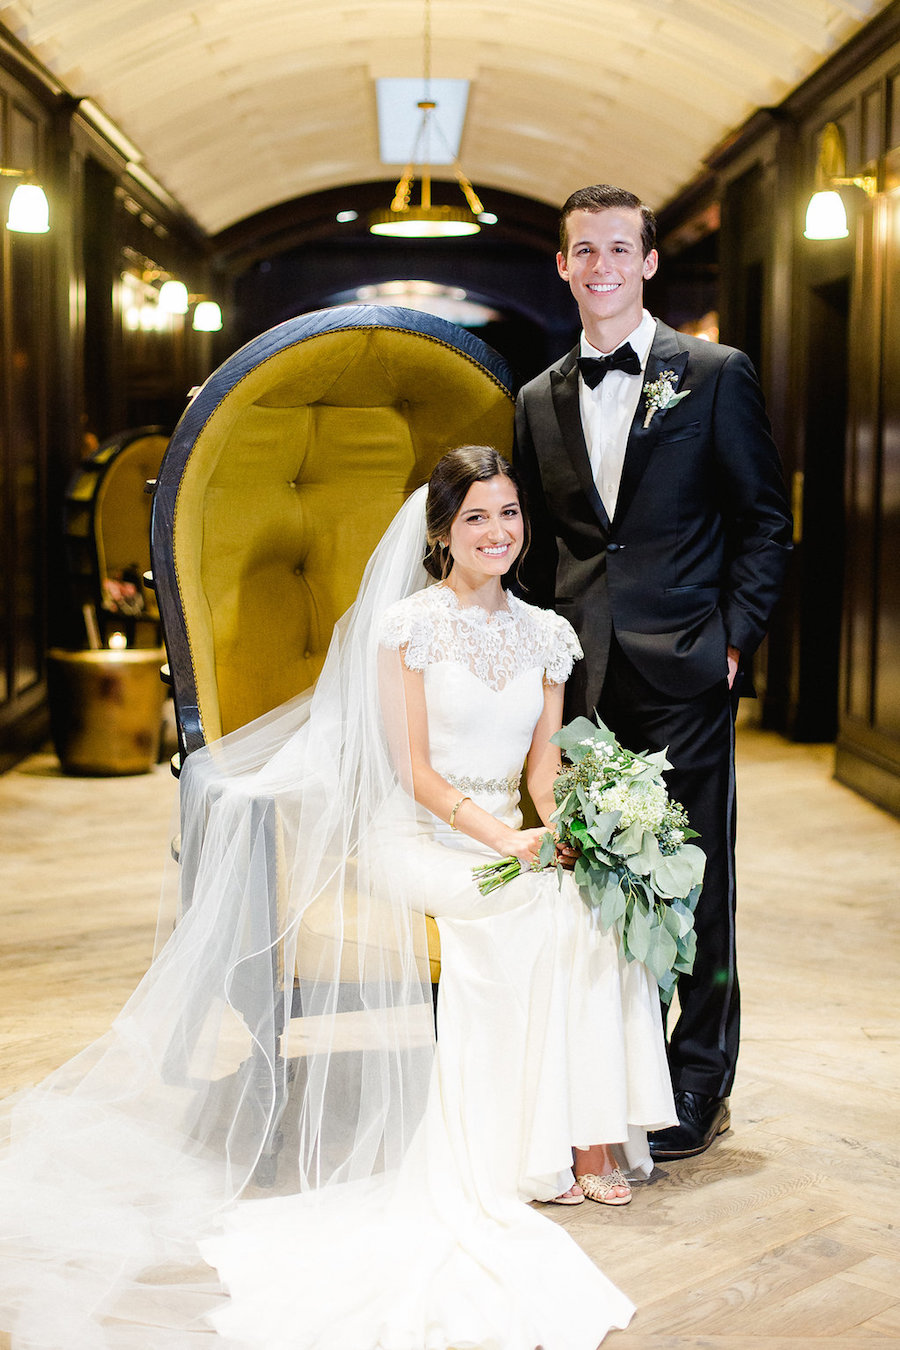 Indoor, Traditional Bride and Groom Wedding Portrait at Tampa Wedding Venue Oxford Exchange | Tampa Wedding Photographer Ailyn LaTorre Photography